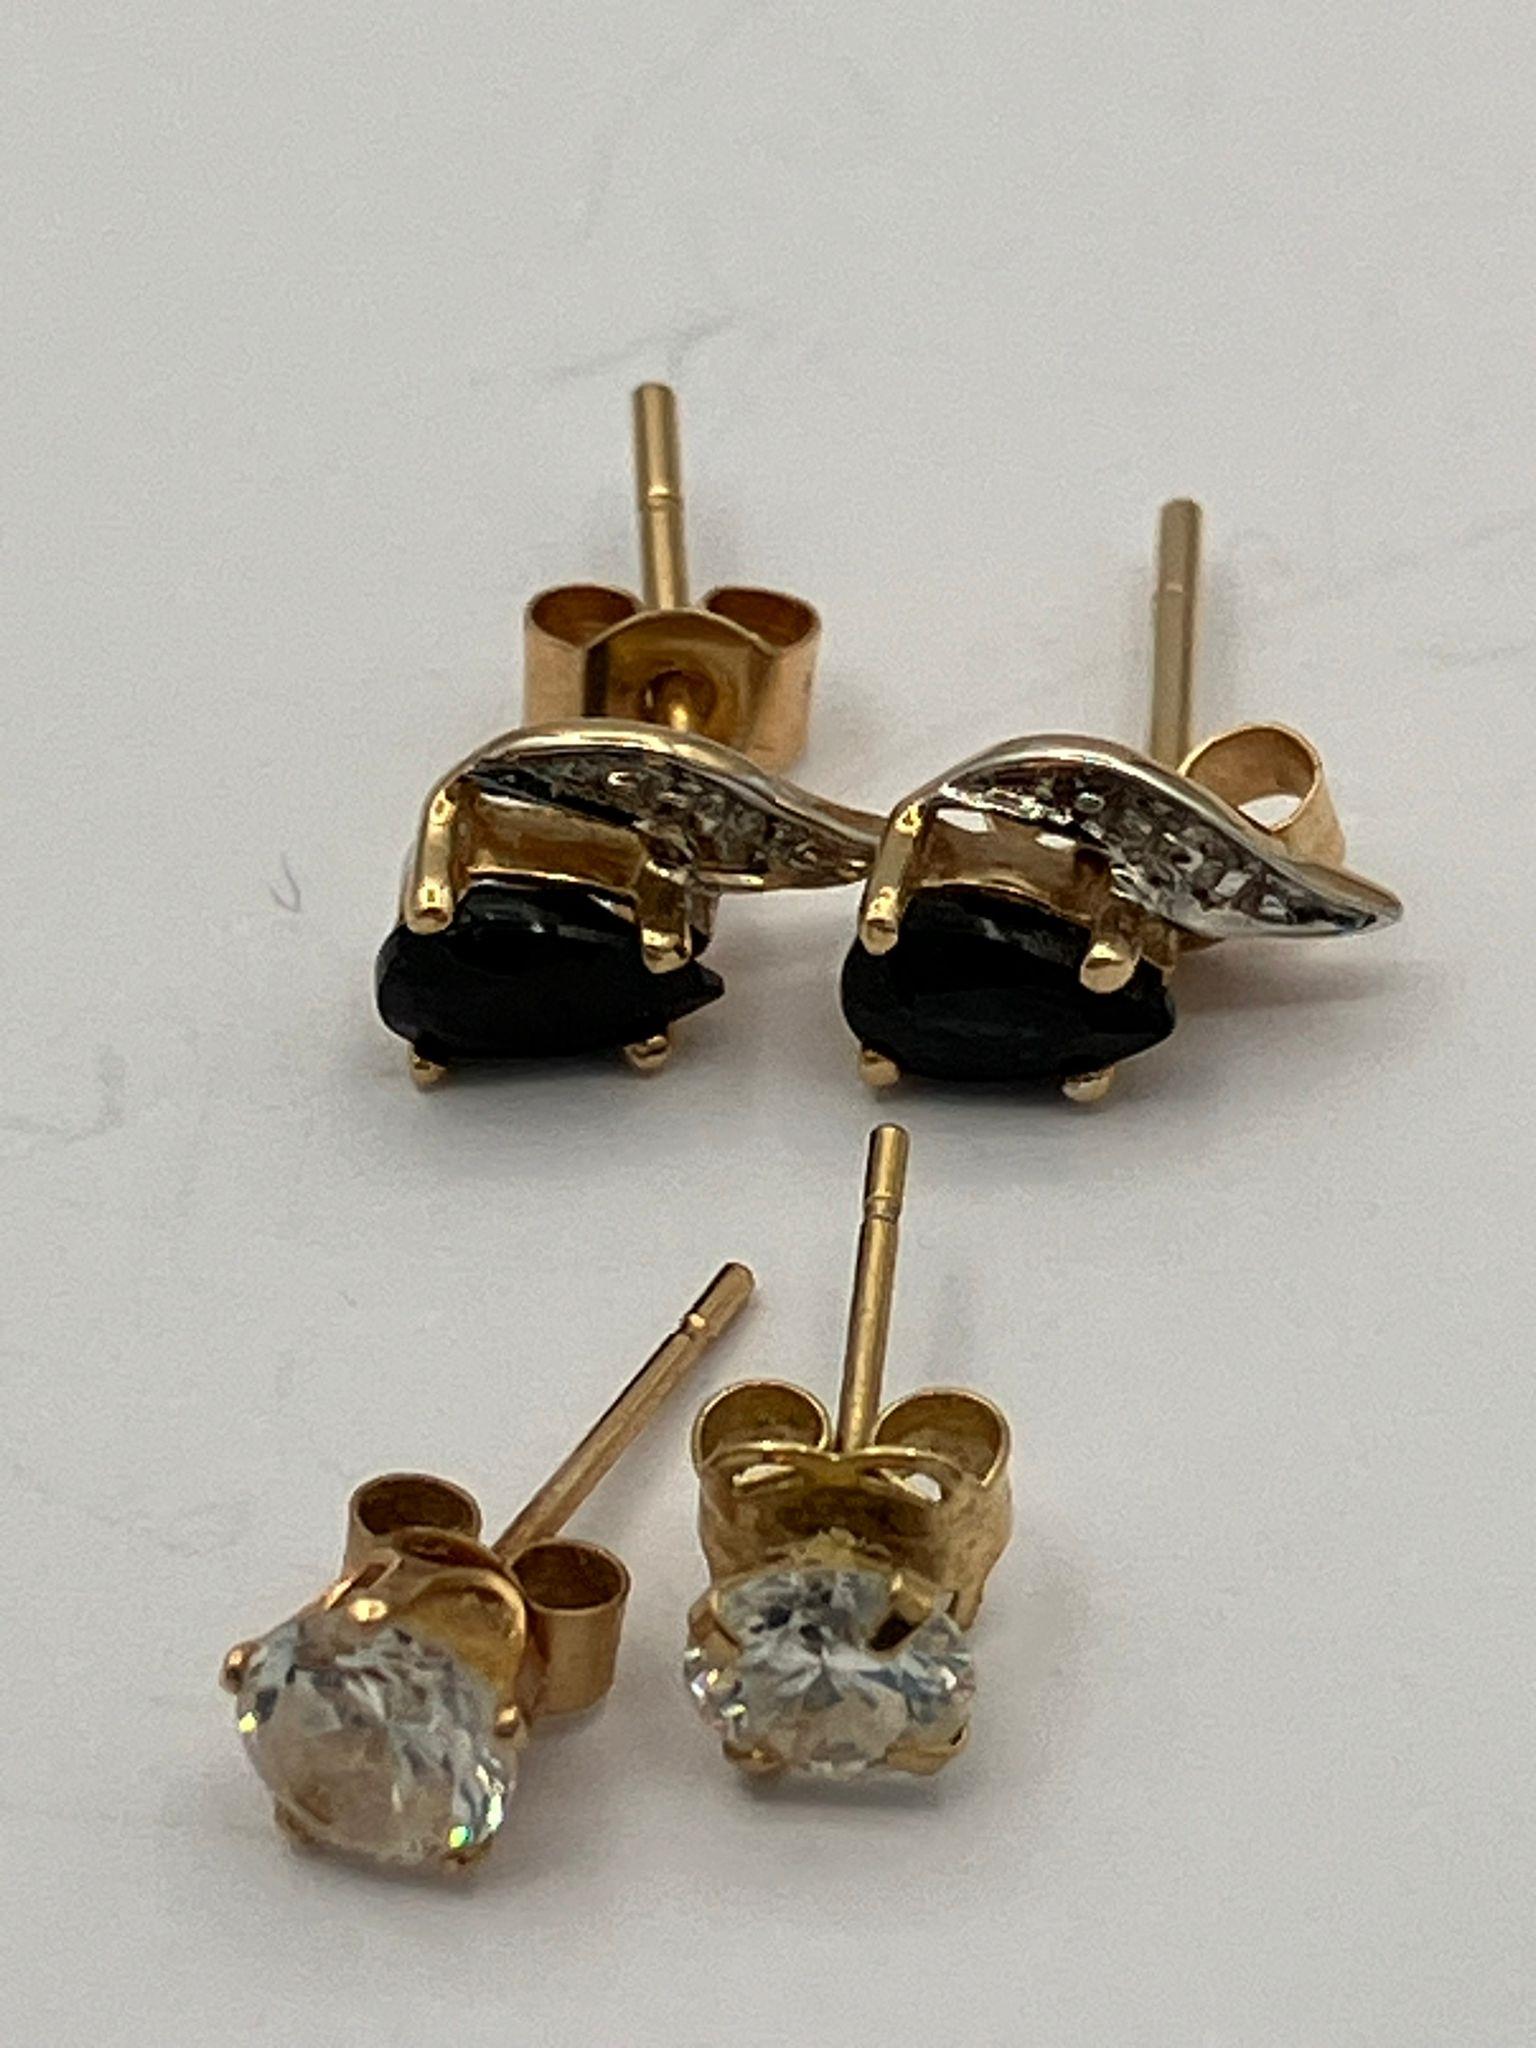 2 x pairs GEM SET 9 carat GOLD STUD EARRINGS. Both pairs complete with gold backs. 1.1 grams.